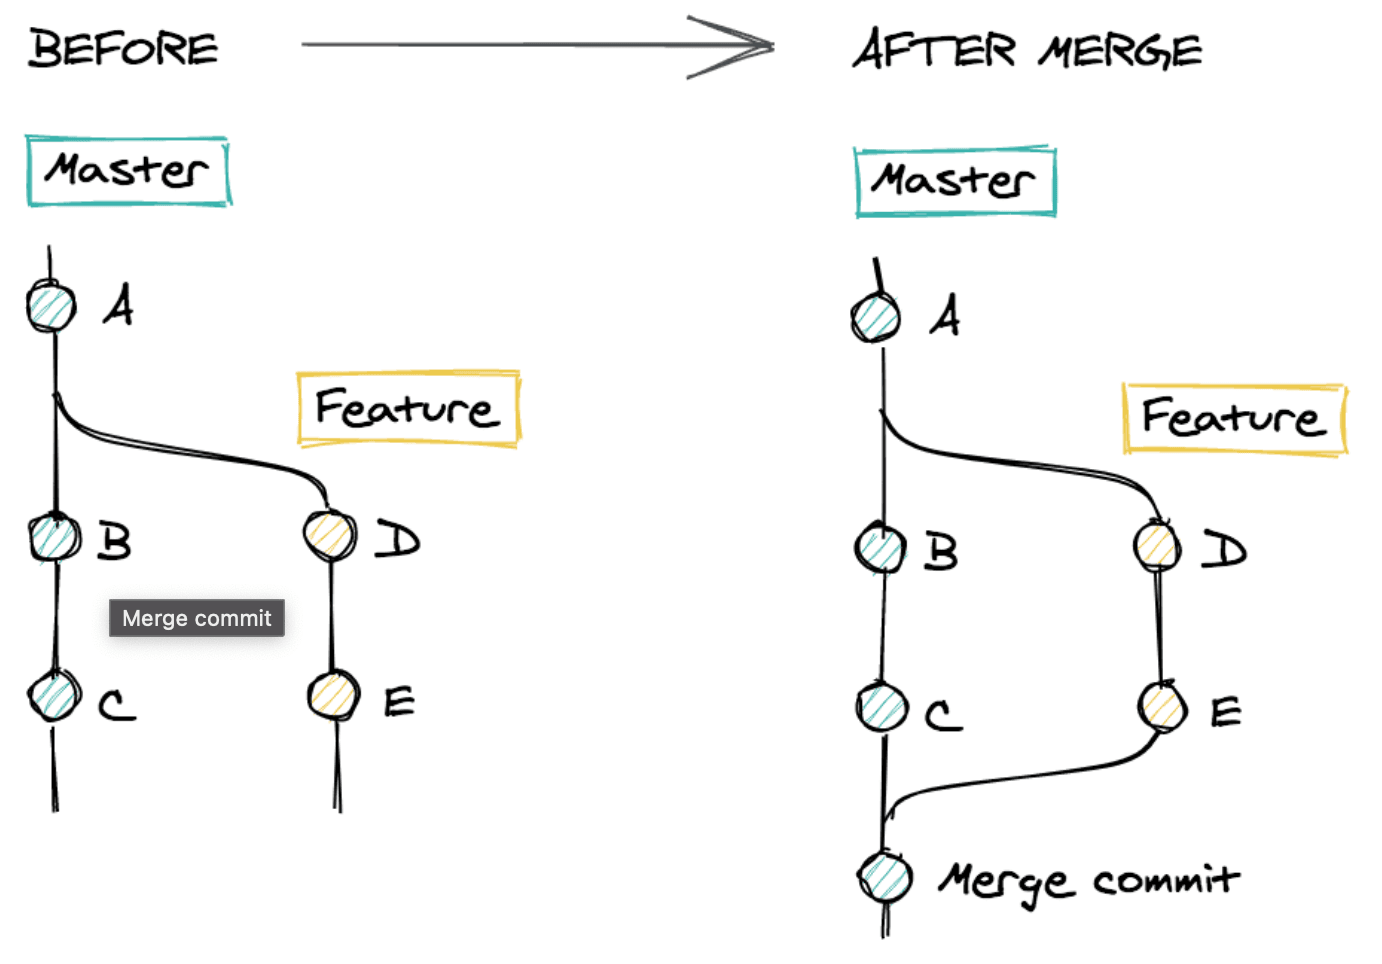 A diagram showing the creation of a merge commit